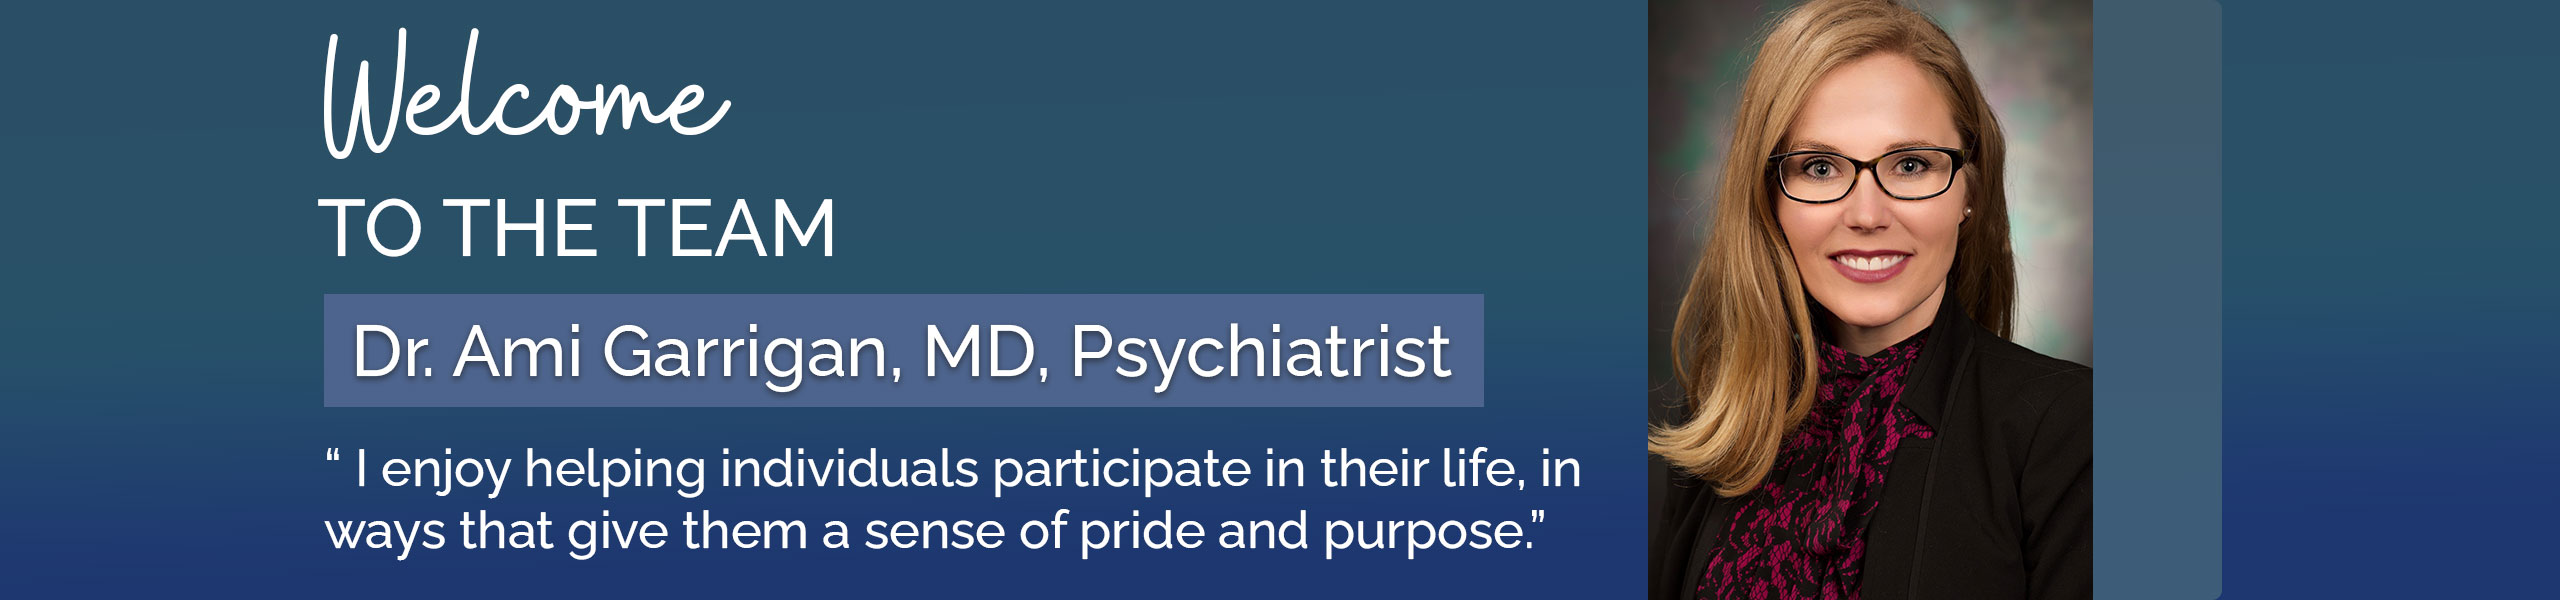 Welcome to the team

Dr. Ami Garrigan, MD, Psychiatrist

“ I enjoy helping individuals participate in their life, in  ways that give them a sense of pride and purpose.”